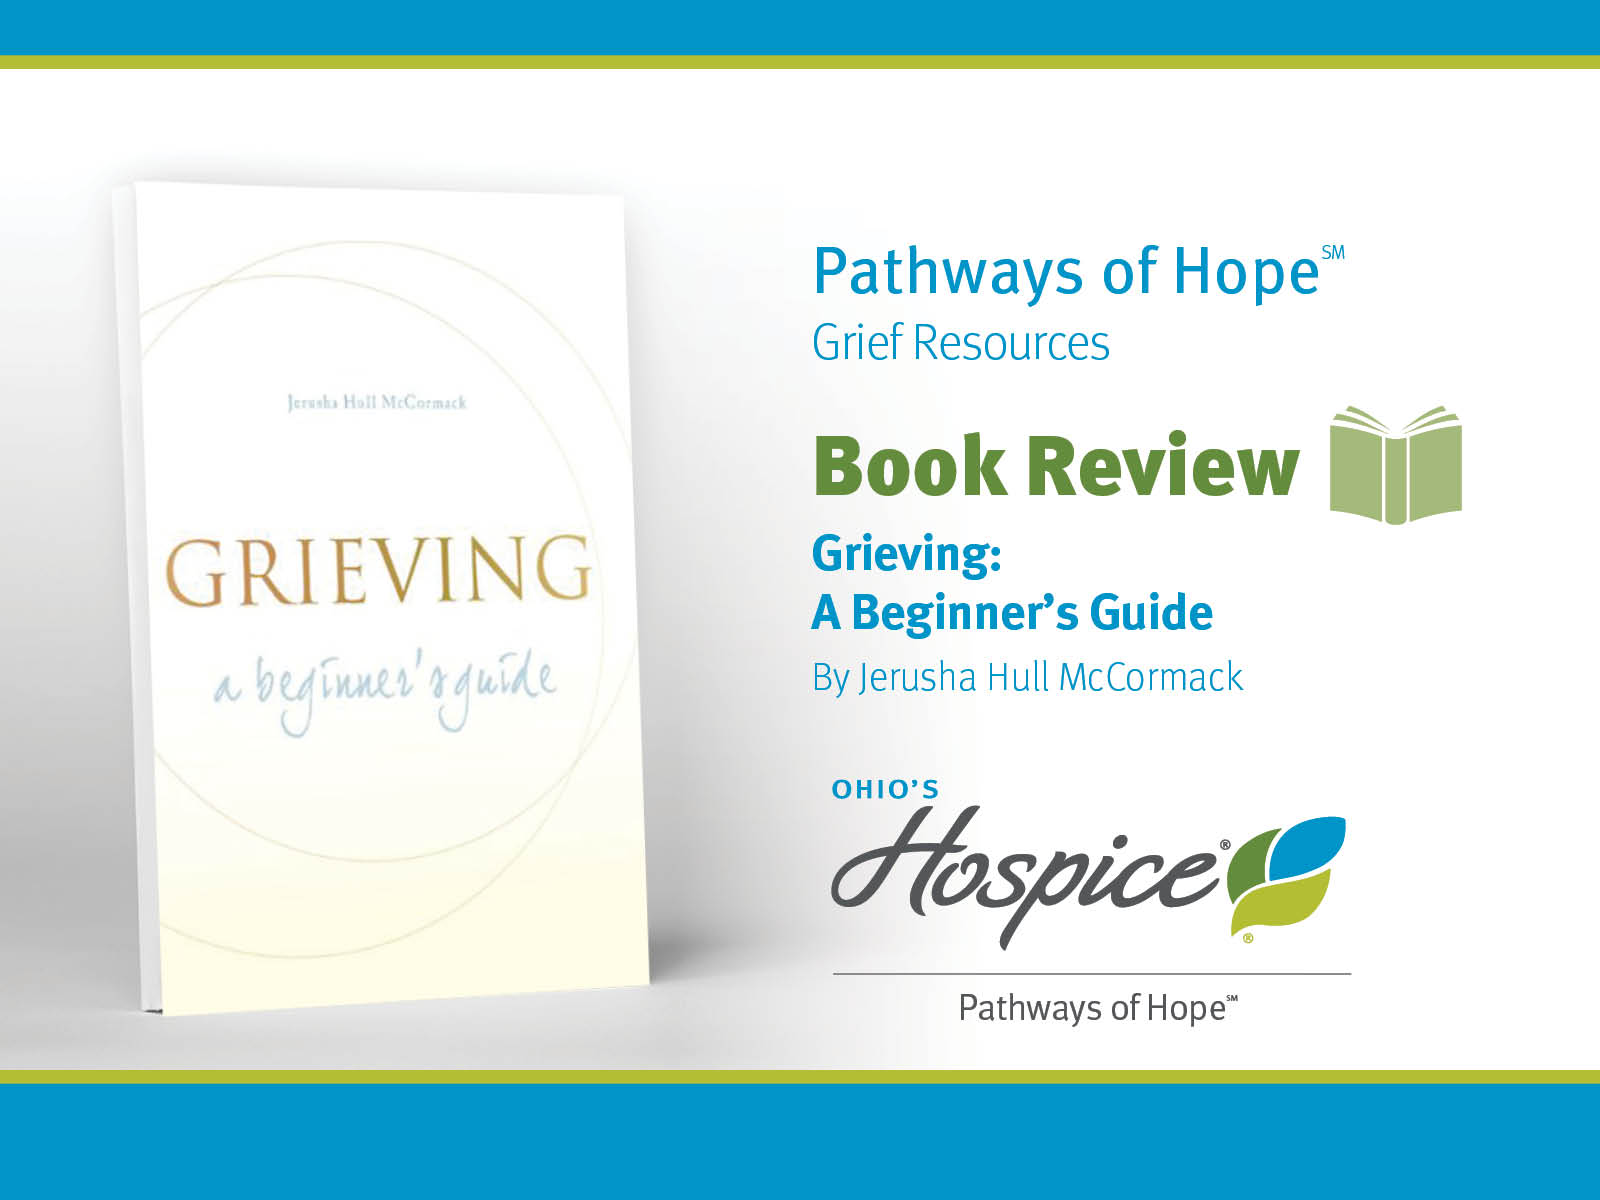 Book Review. Grieving: A Beginner's Guide by Jerusha Hull McCormack